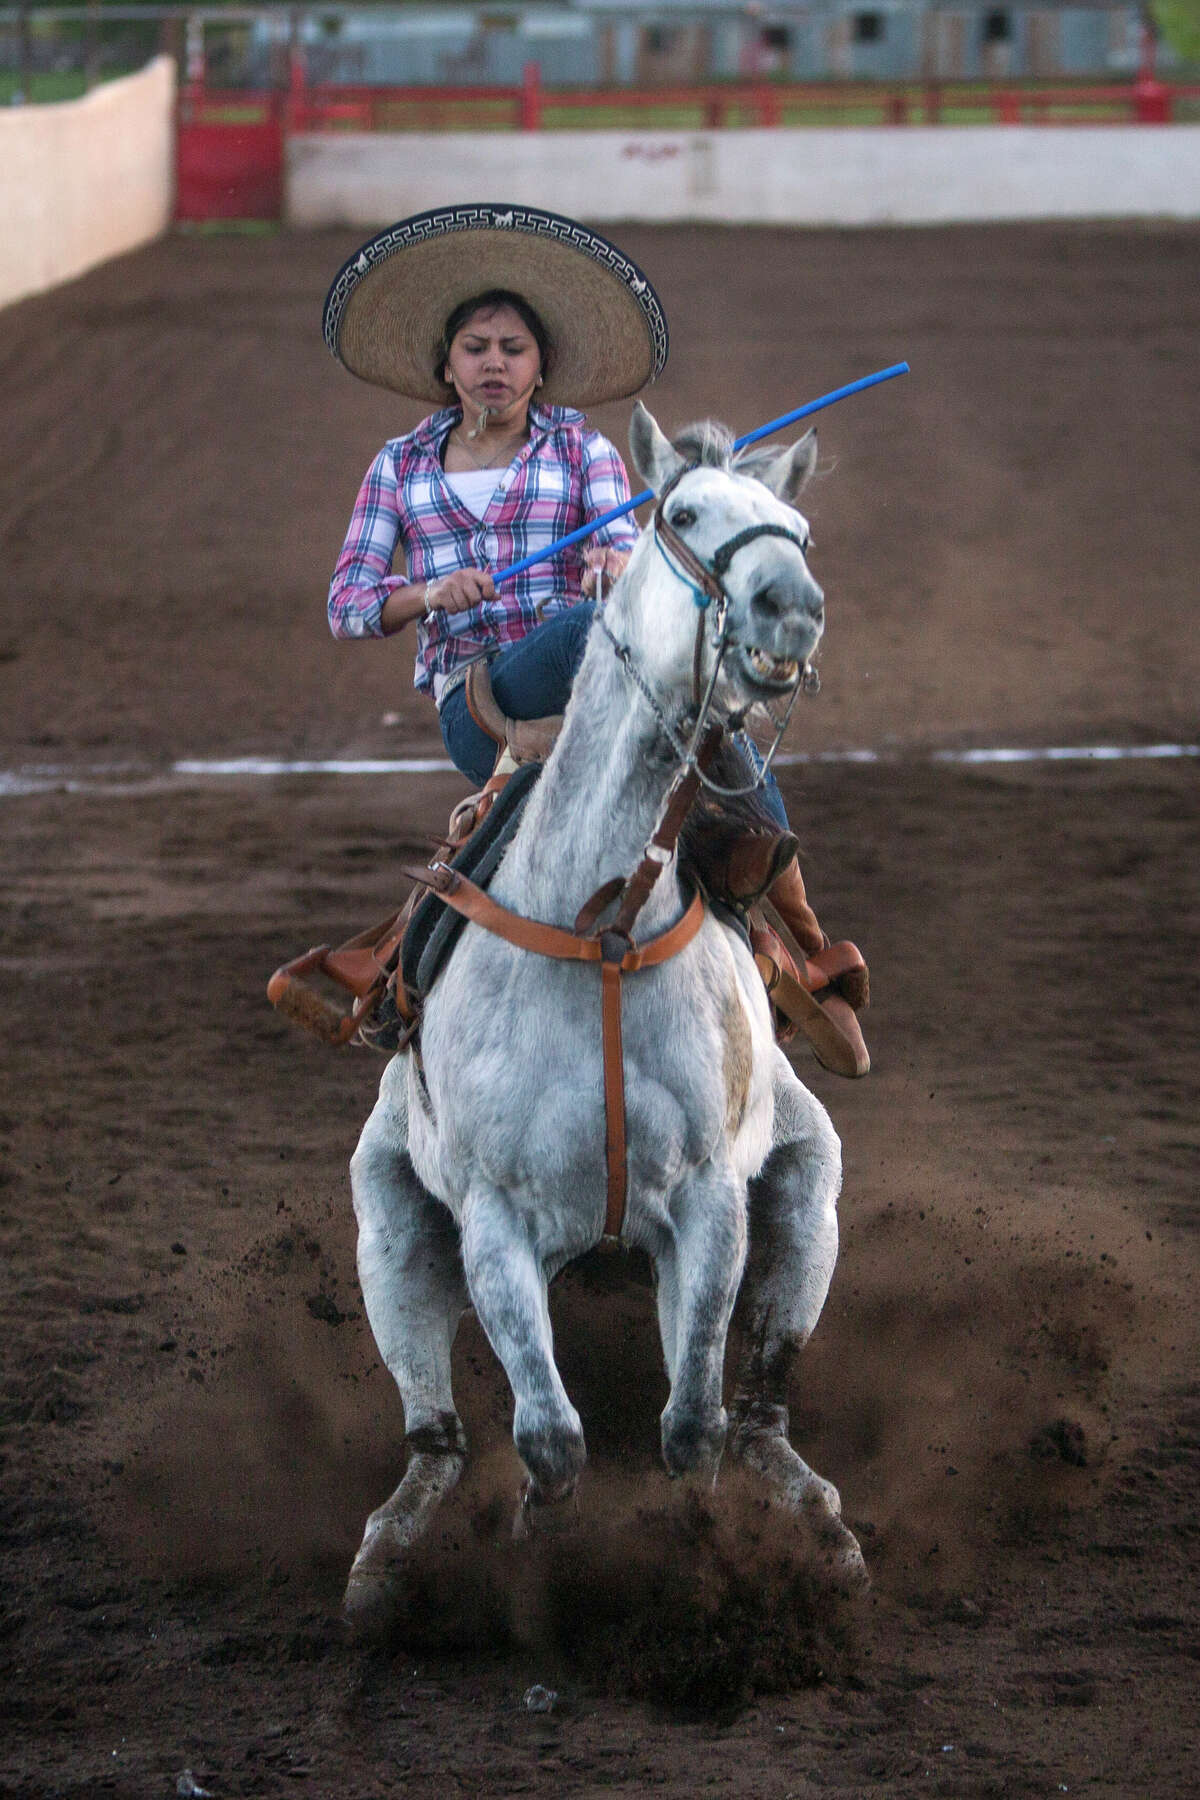 Brenda Murillo performs a "punta," or slide stop, on her horse Cazador during practice at El Rancho Unico in Atascosa, Texas on March 26, 2015. For a punta, the rider must line the horse up without moving, then gallop at a high speed in a straight line, stop inside of the rectangle with one hand and salute. The horse's hooves cannot leave the ground more than three times during the slide and the slide must be a minimum of six meters before the horse stops. Escaramuza teams can receive up to 12 additional points for each of the two puntas performed. "Puntas can actually help you win a competition or catch up if you fall behind," Coach Jimmy Ayala said.